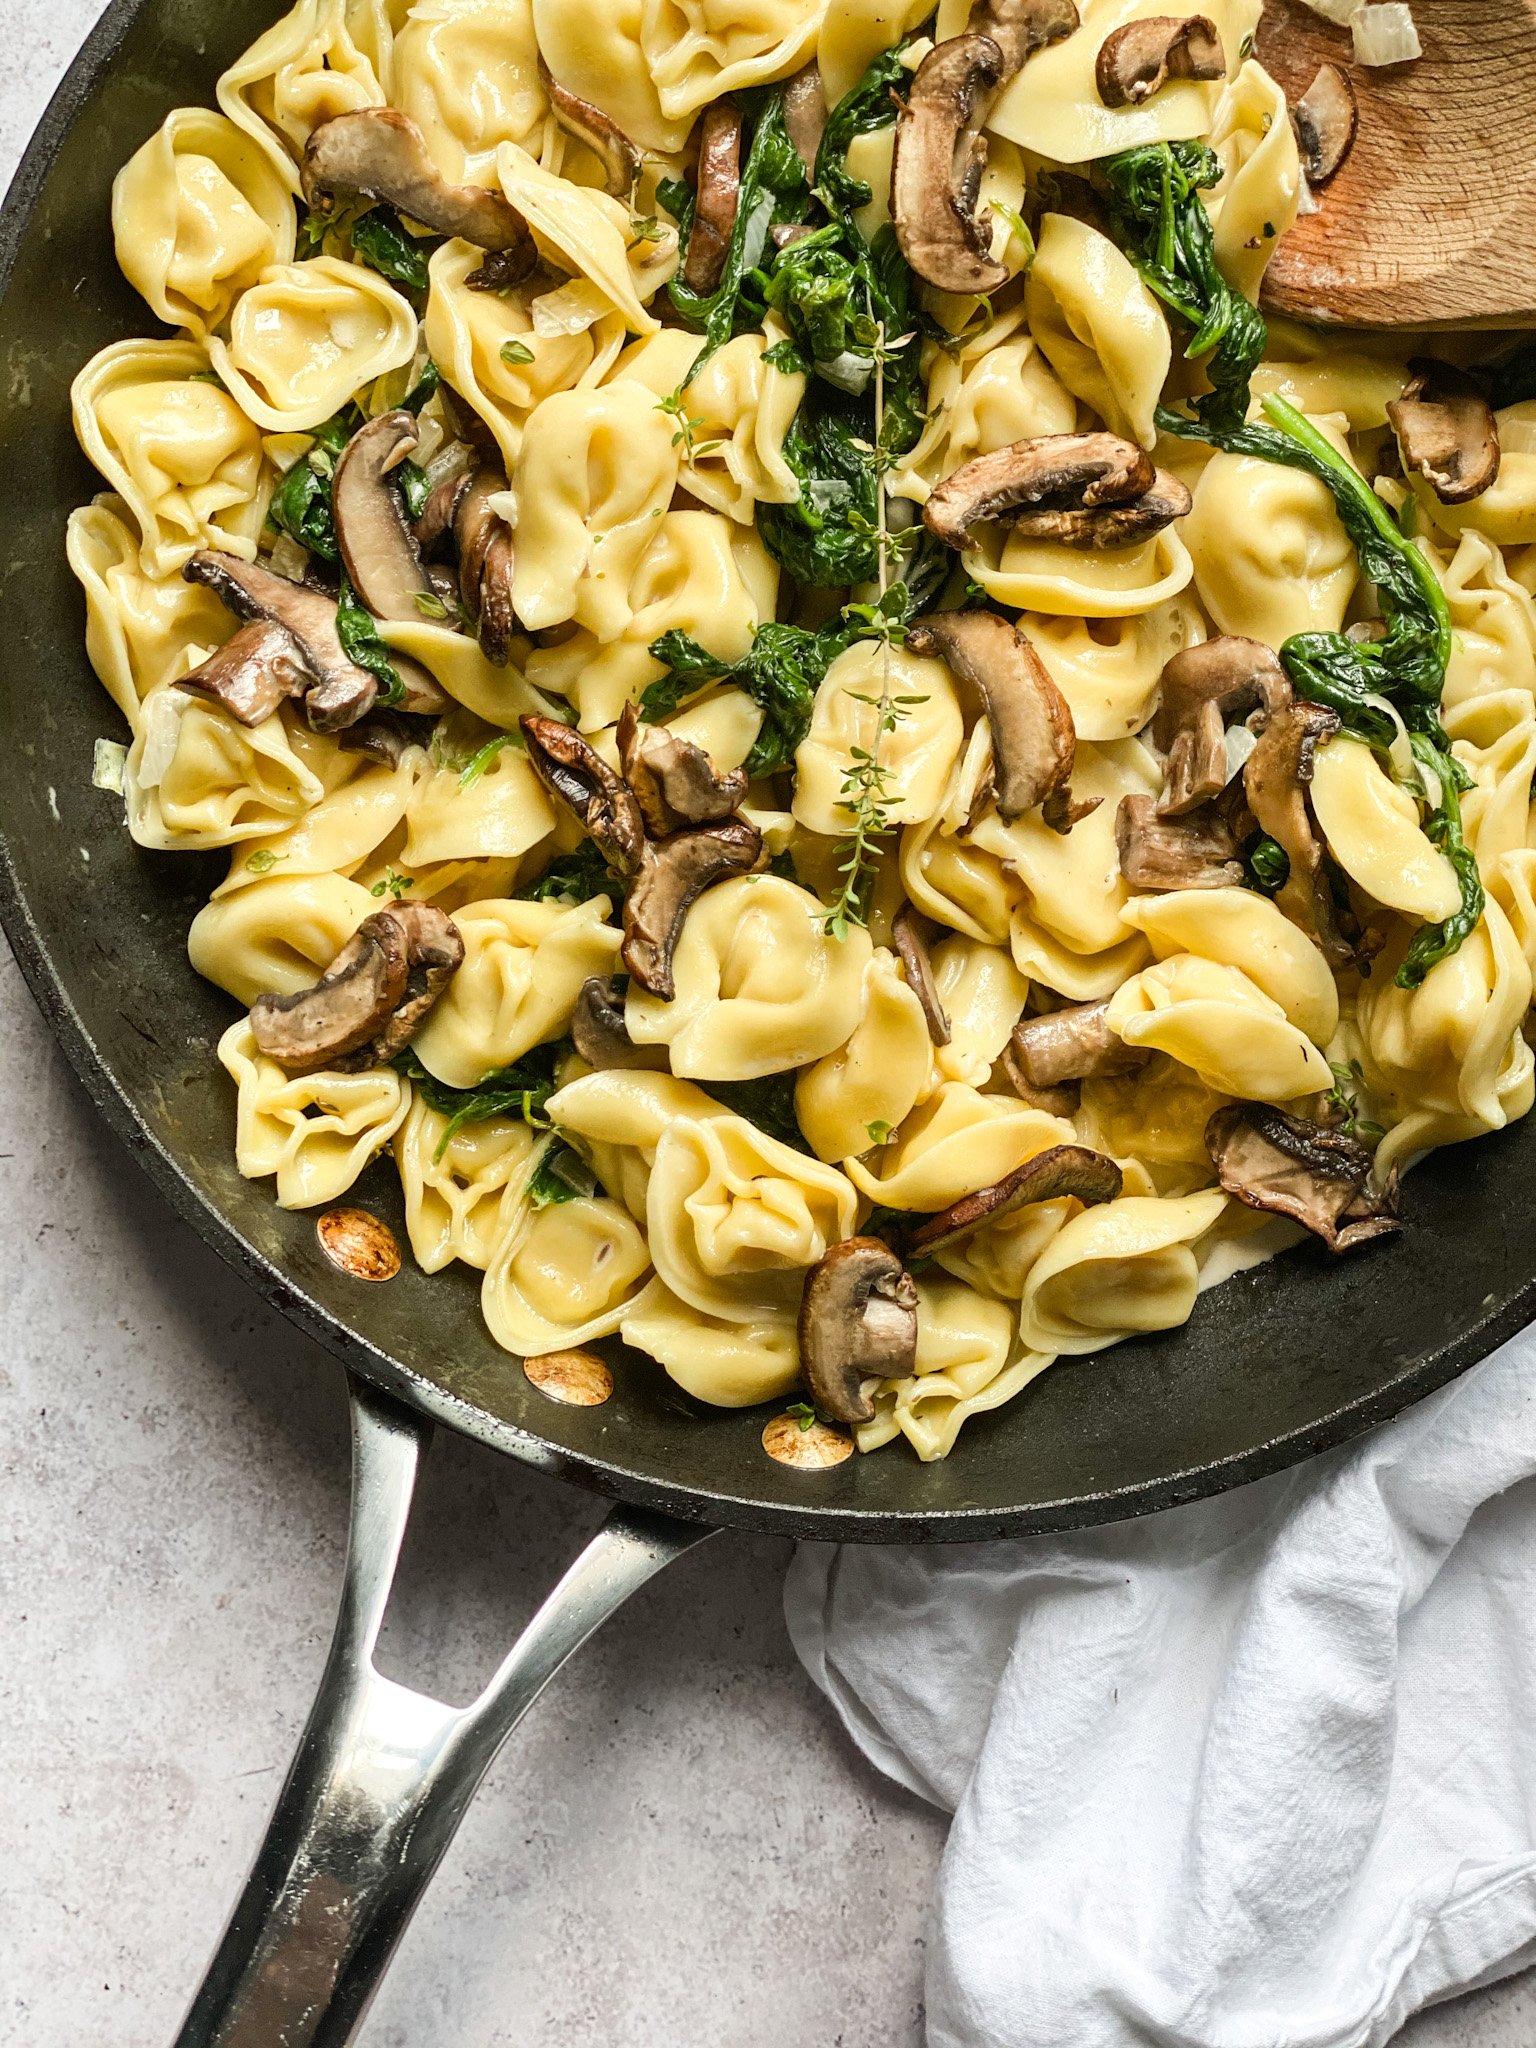 Chocolate and Lace Shares her recipe for Creamy Mushroom and Spinach Tortellini